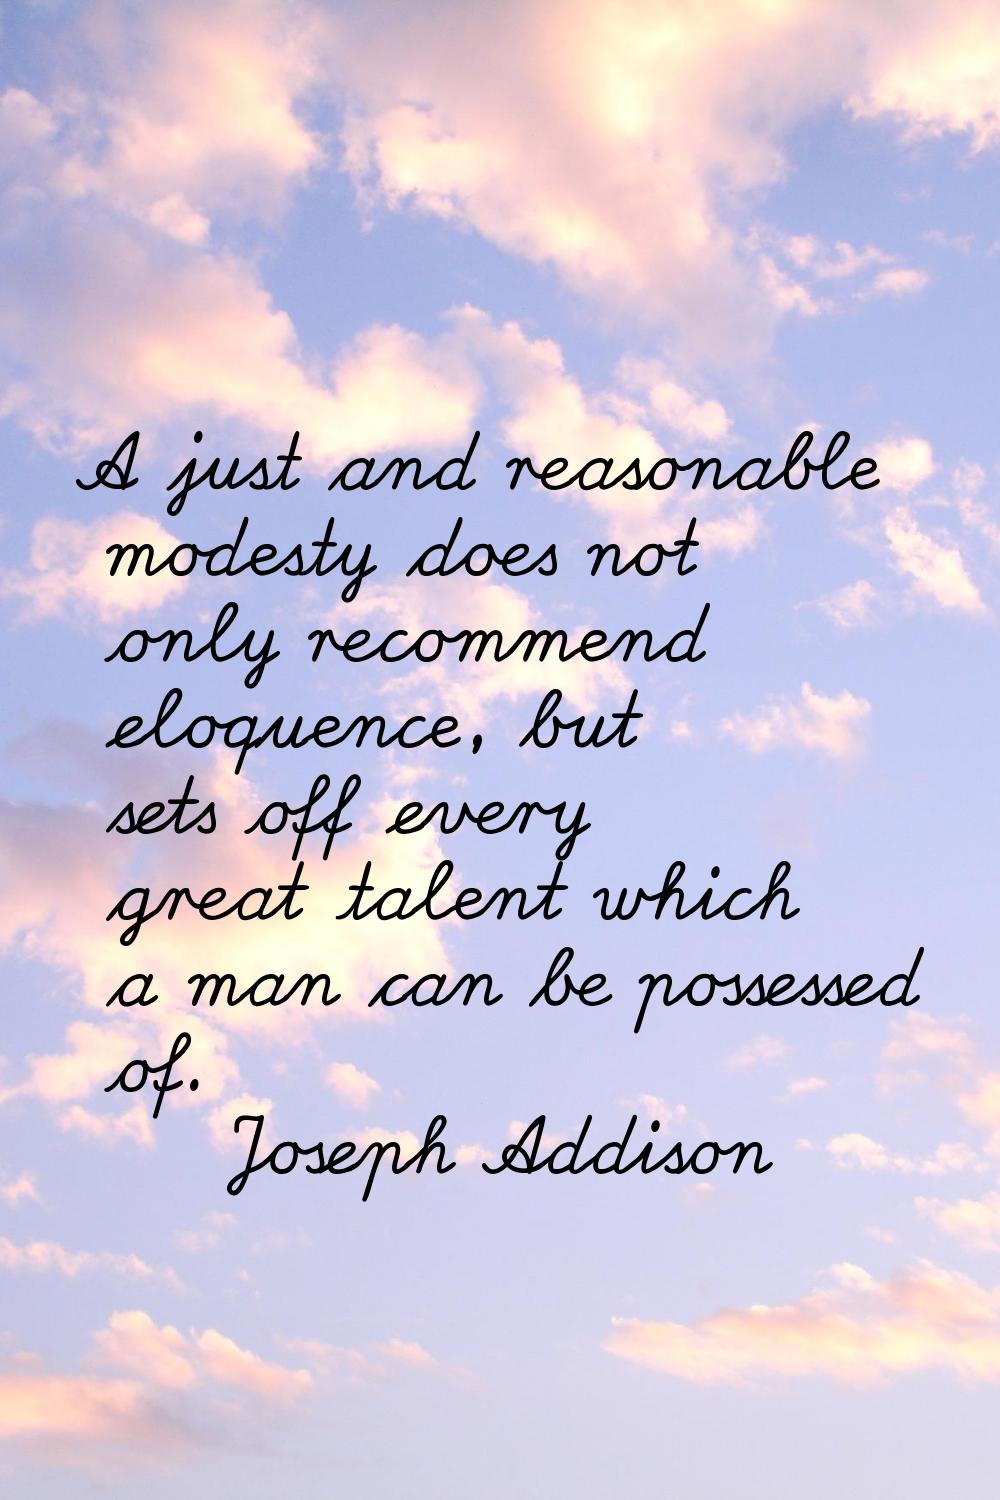 A just and reasonable modesty does not only recommend eloquence, but sets off every great talent wh